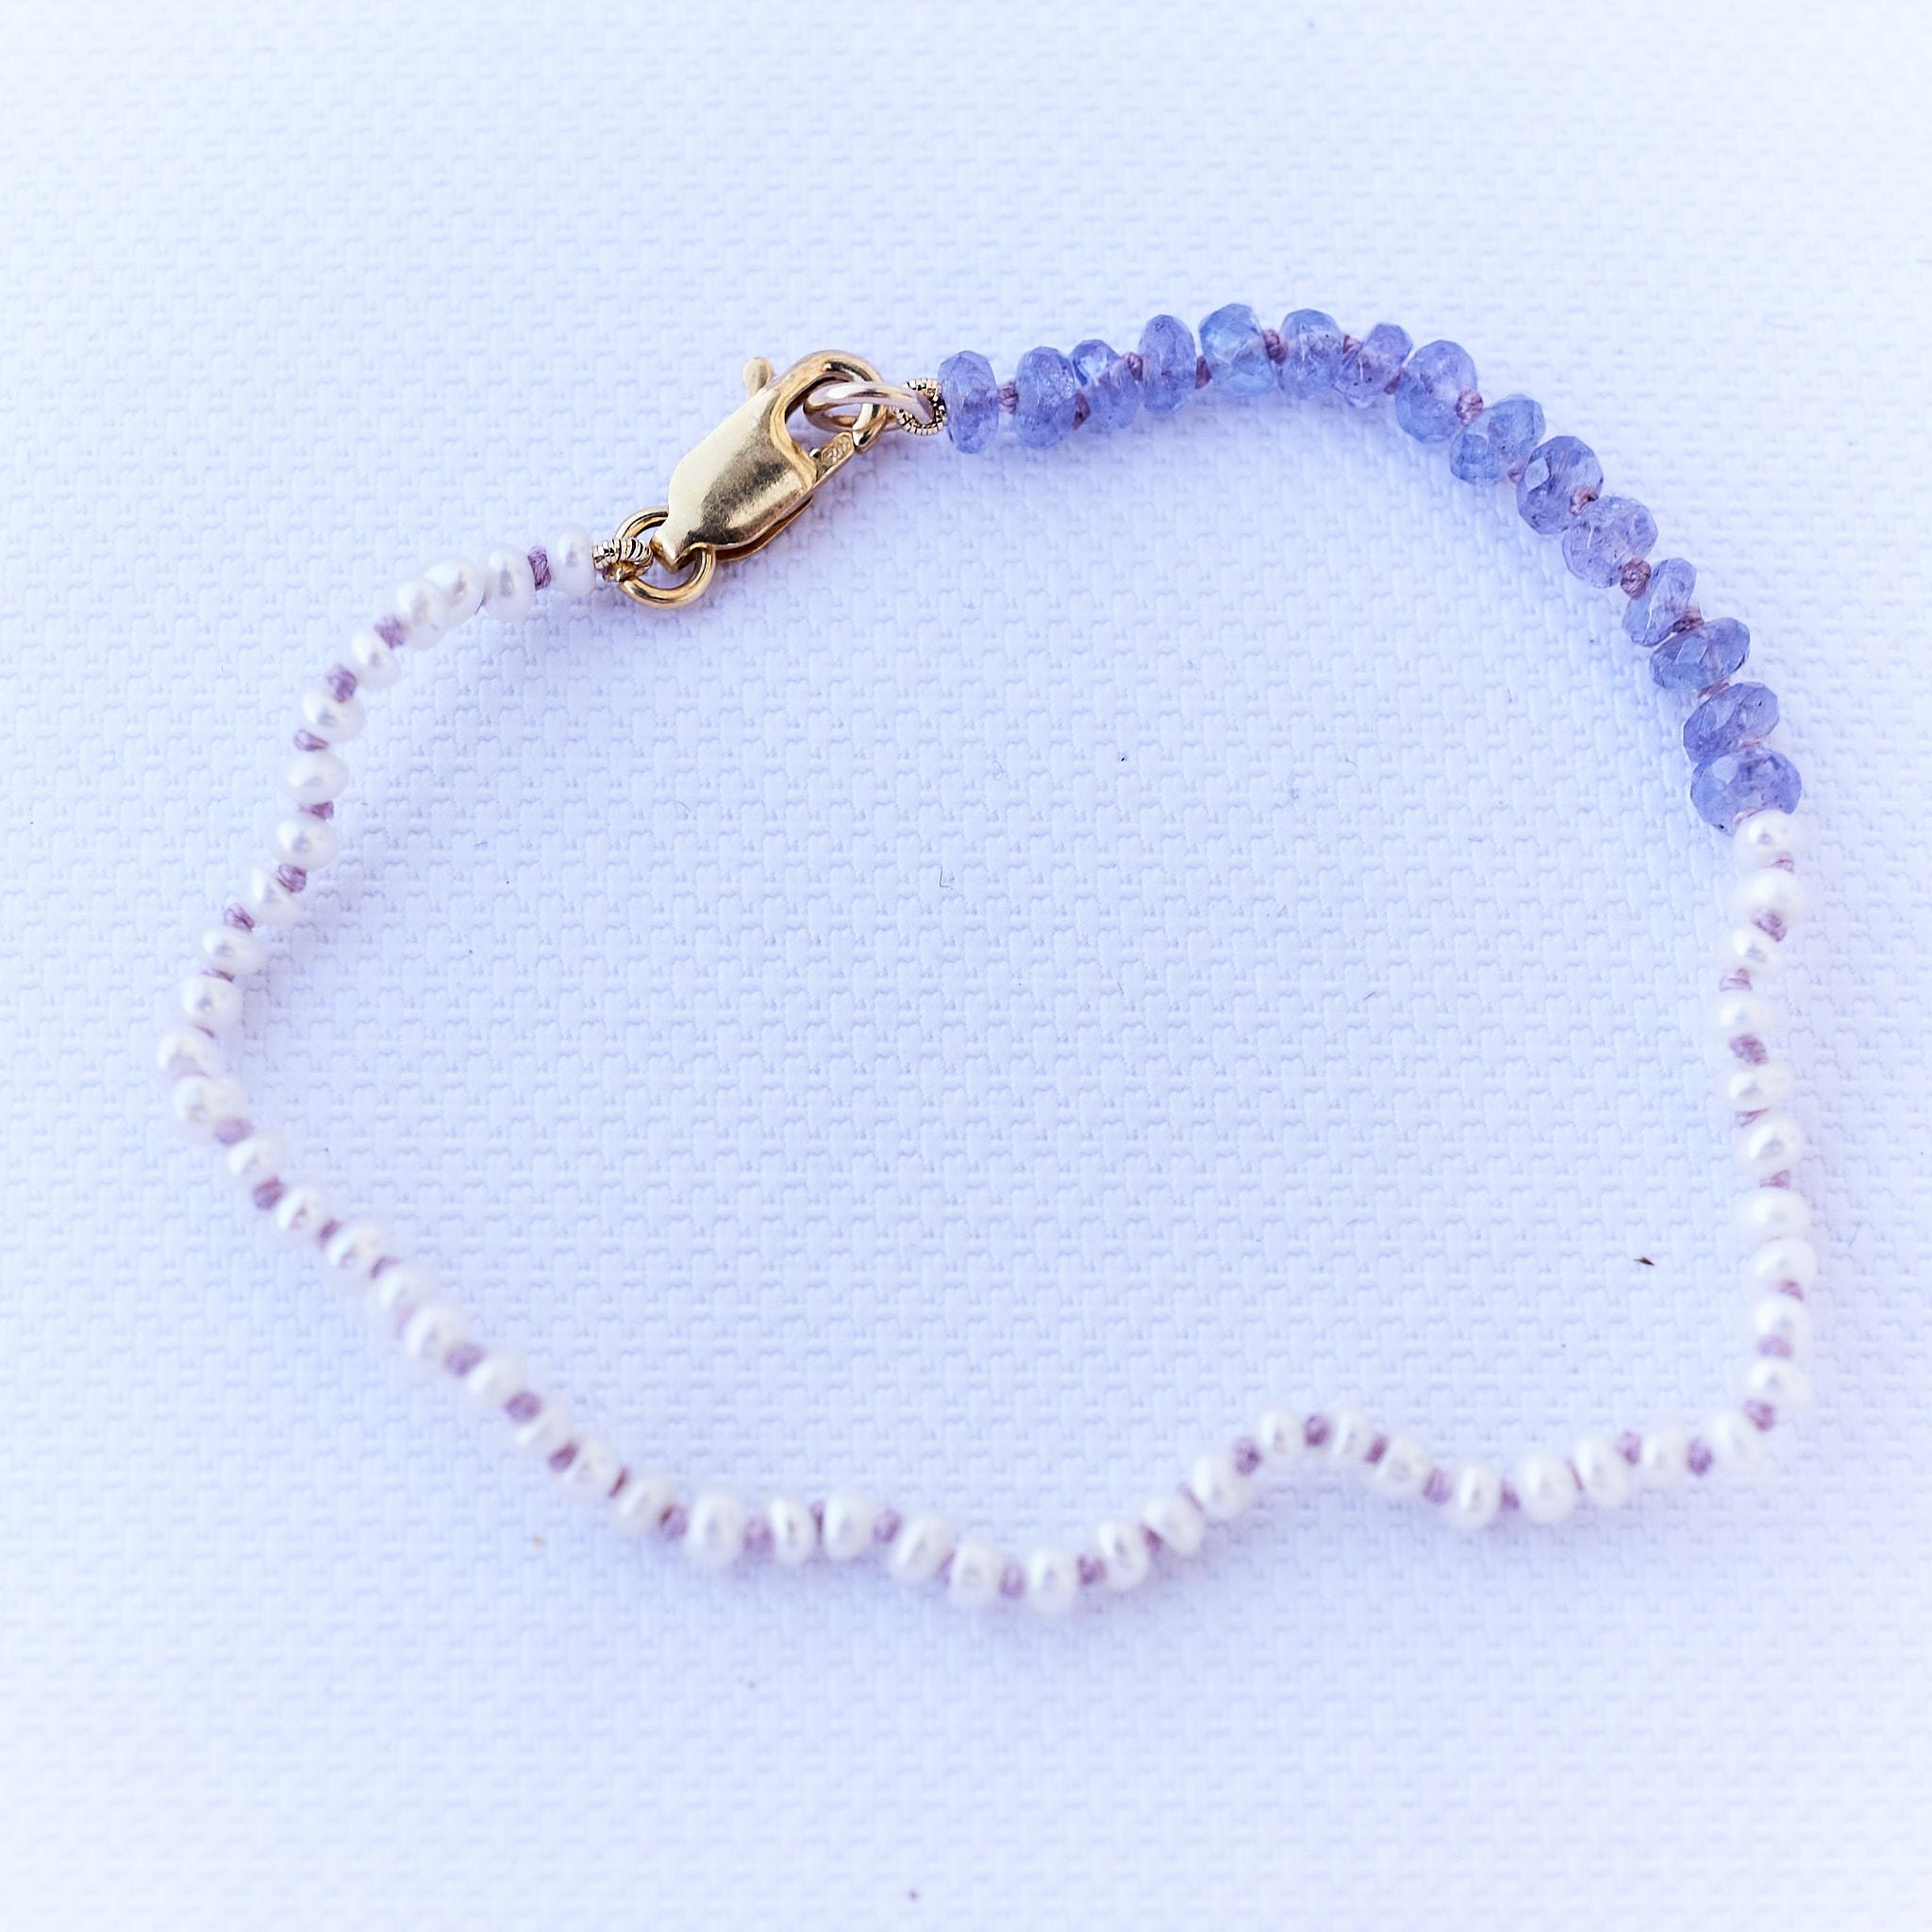 White Pearl Tanzanite Beaded Bracelet 
Lilac Silk Thread 
Designer: J Dauphin
Metal: Gold Filled Clasp

J Dauphin jewelry is hand made in Los Angeles and was created by designer Johanna Dauphin. Most of the jewelry is unique or created in small